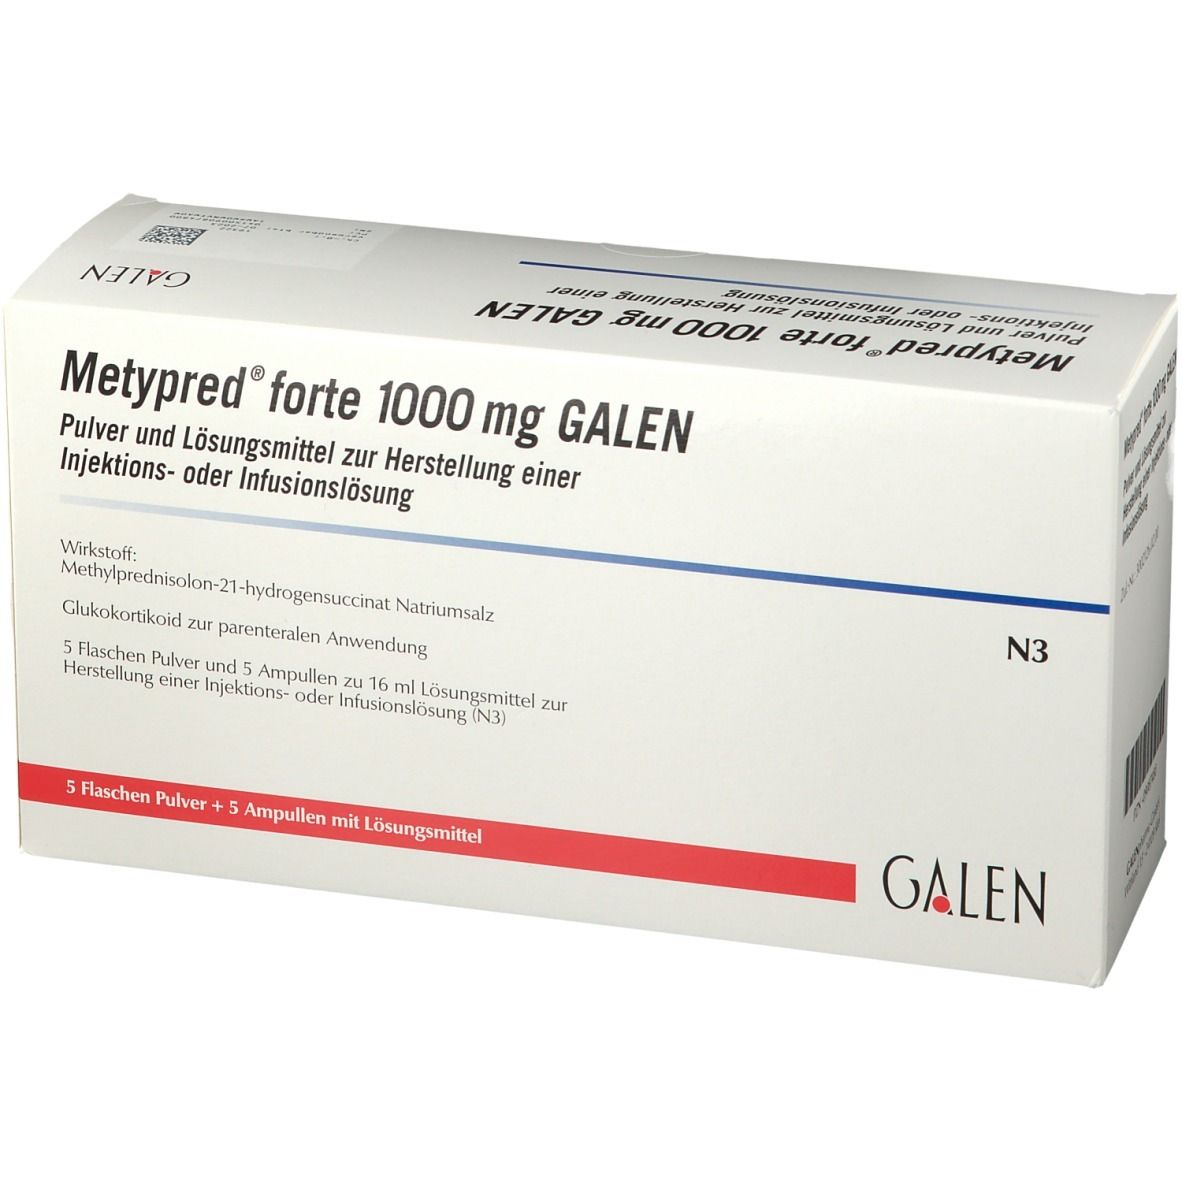 Metypred® forte 1000 mg GALEN